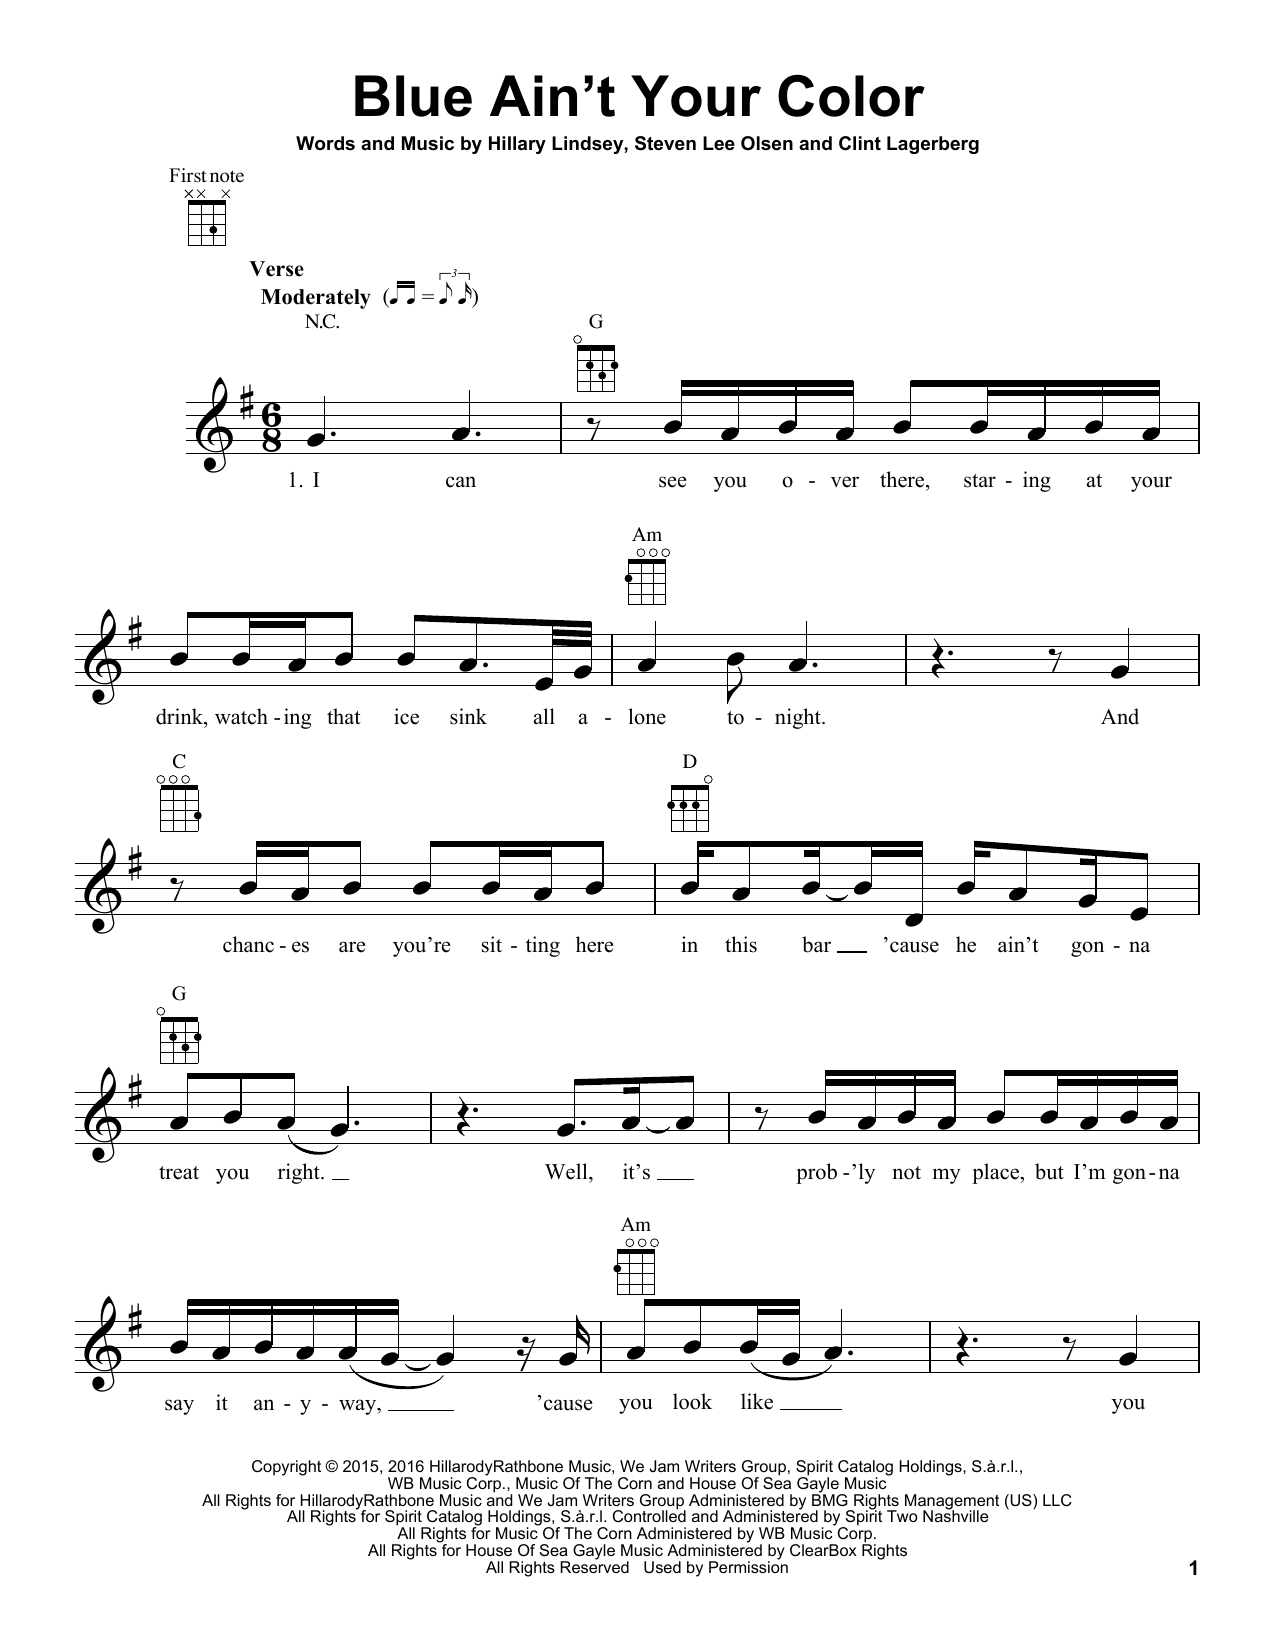 Download Keith Urban Blue Ain't Your Color Sheet Music